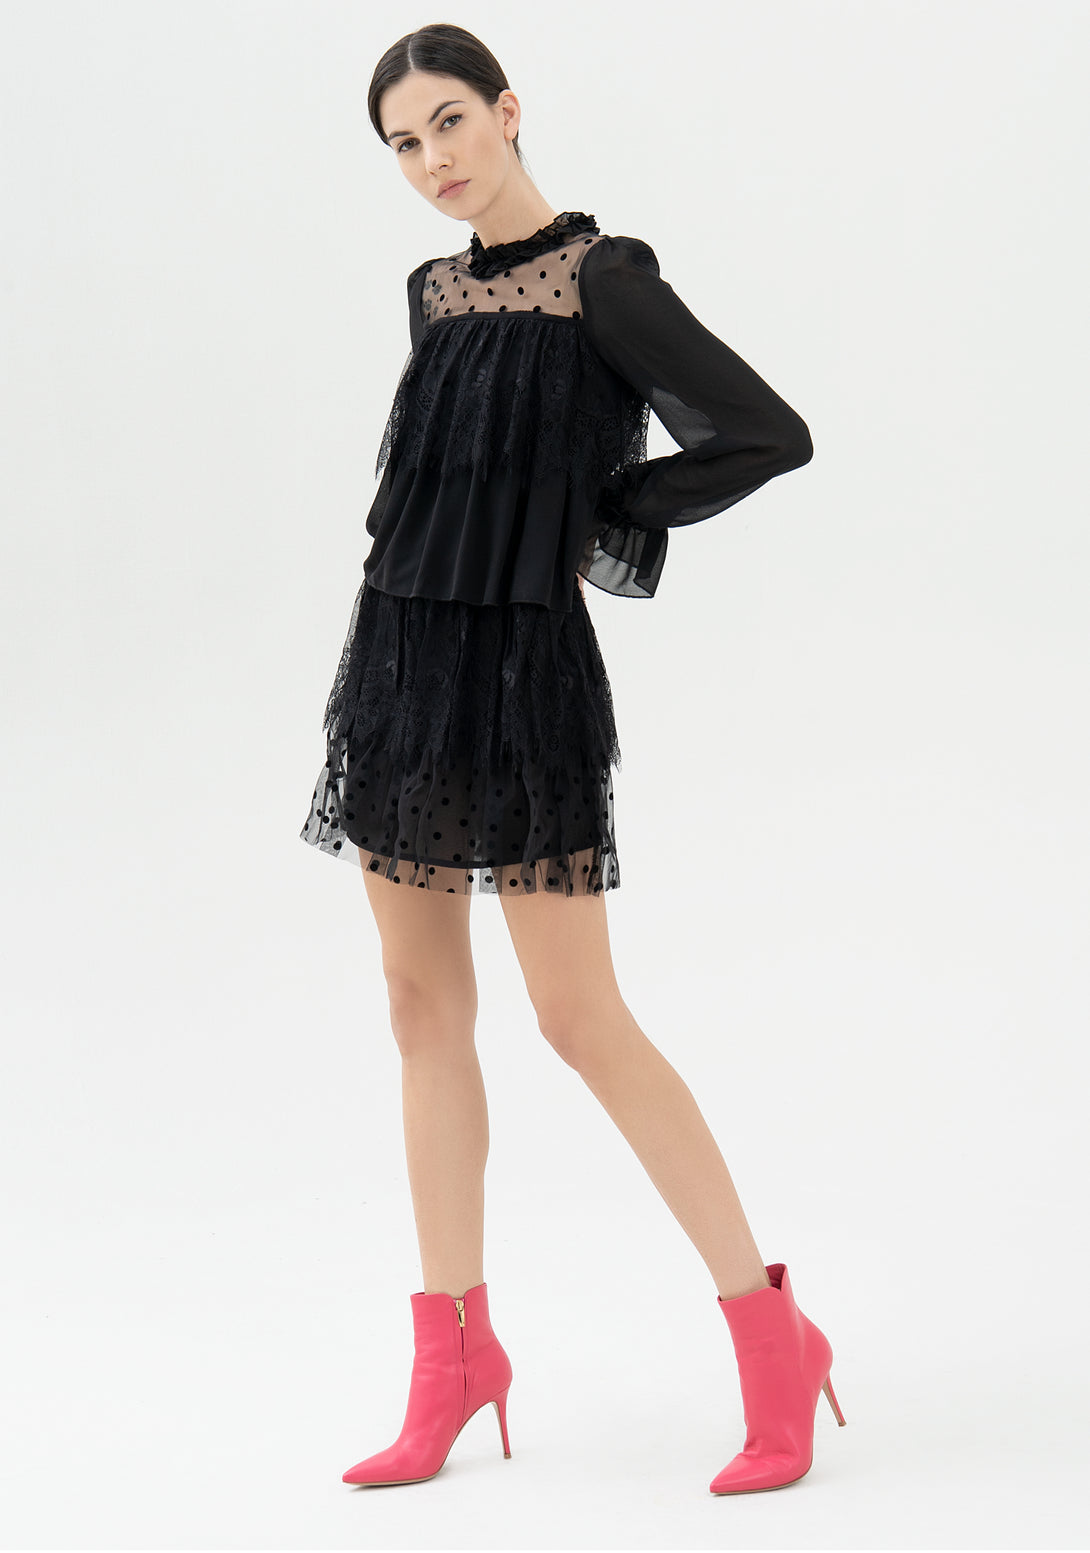 Mini dress A-shape made in tulle and lace fabrics